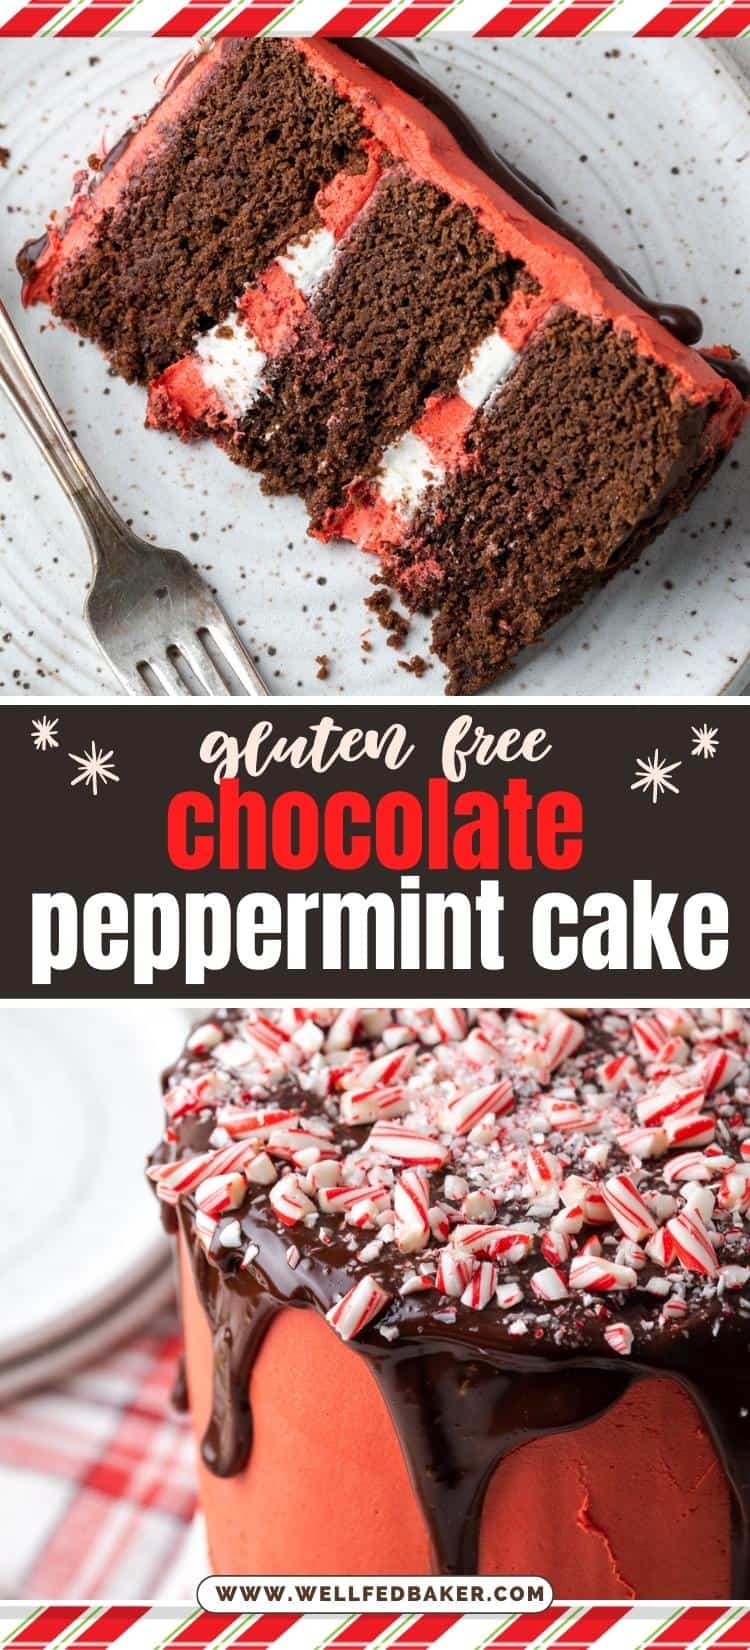 Pin for gluten free chocolate peppermint cake.